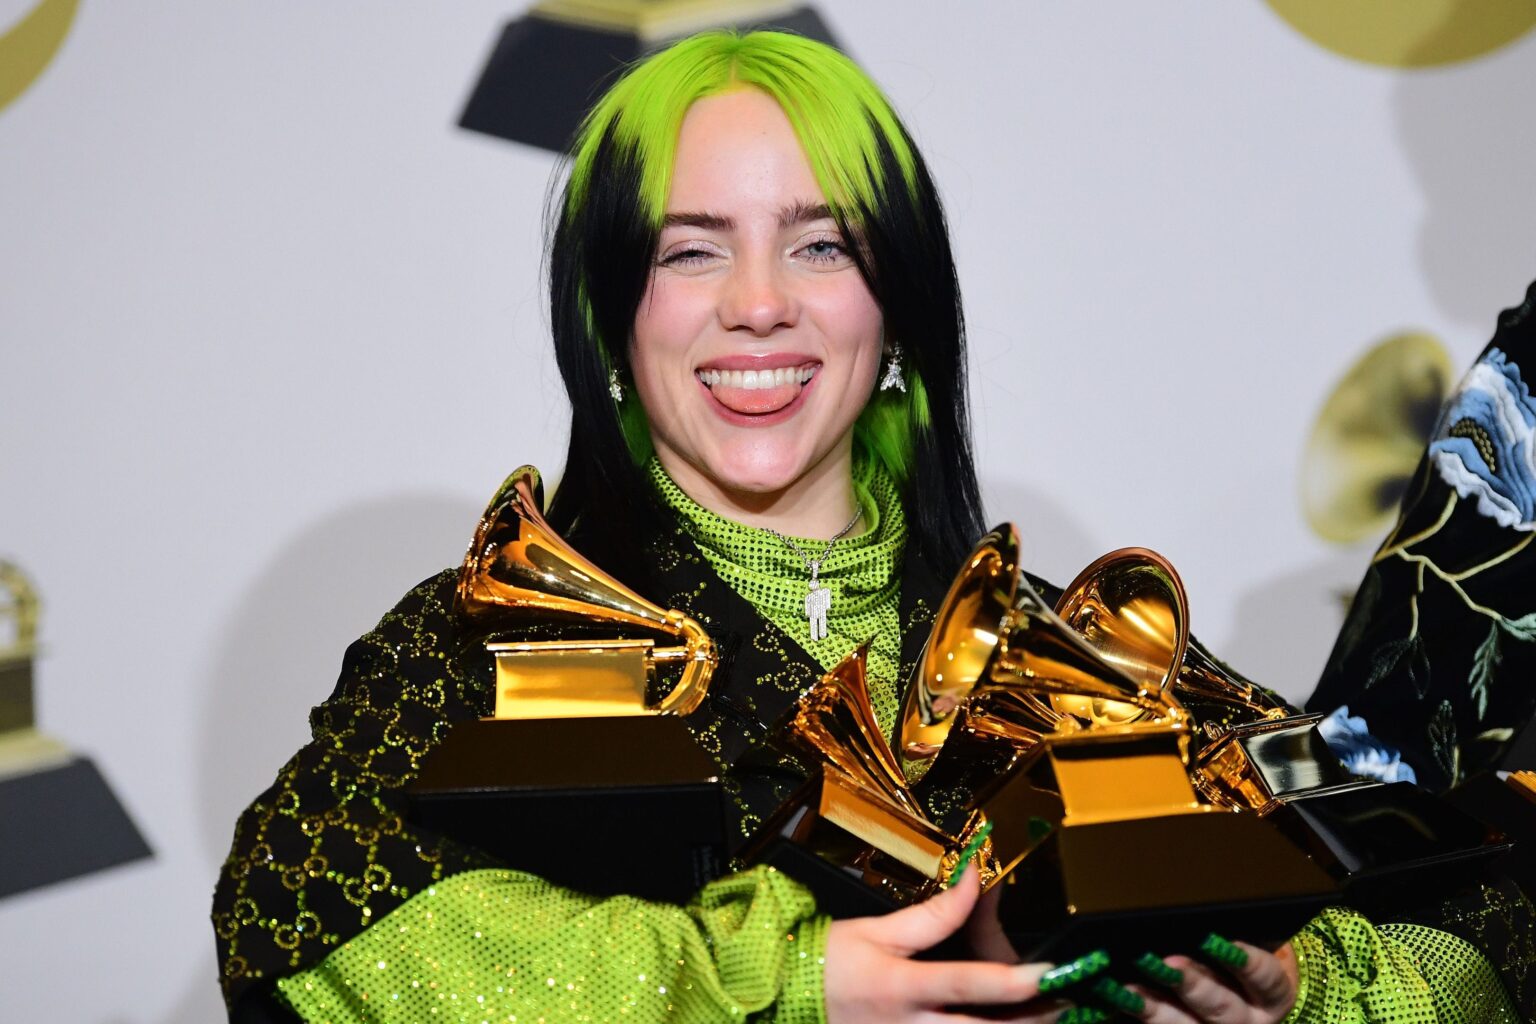 Celebrate the birthday of pop singer Billie Eilish by looking back at her already hugely successful career so far.